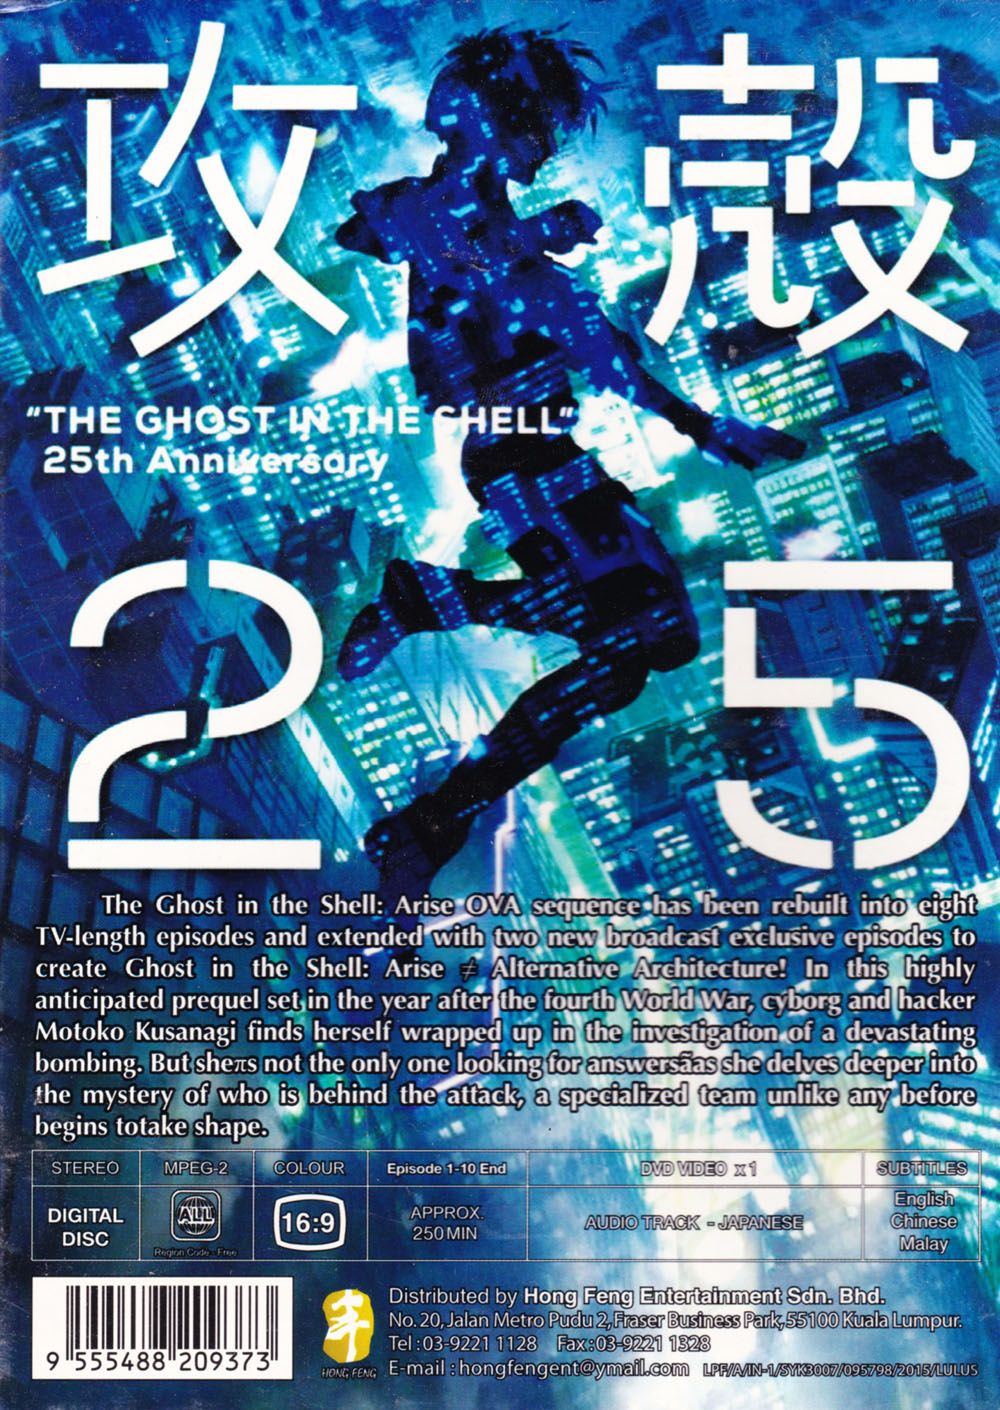 Ghost in the Shell: Arise - Alternative Architecture image 3